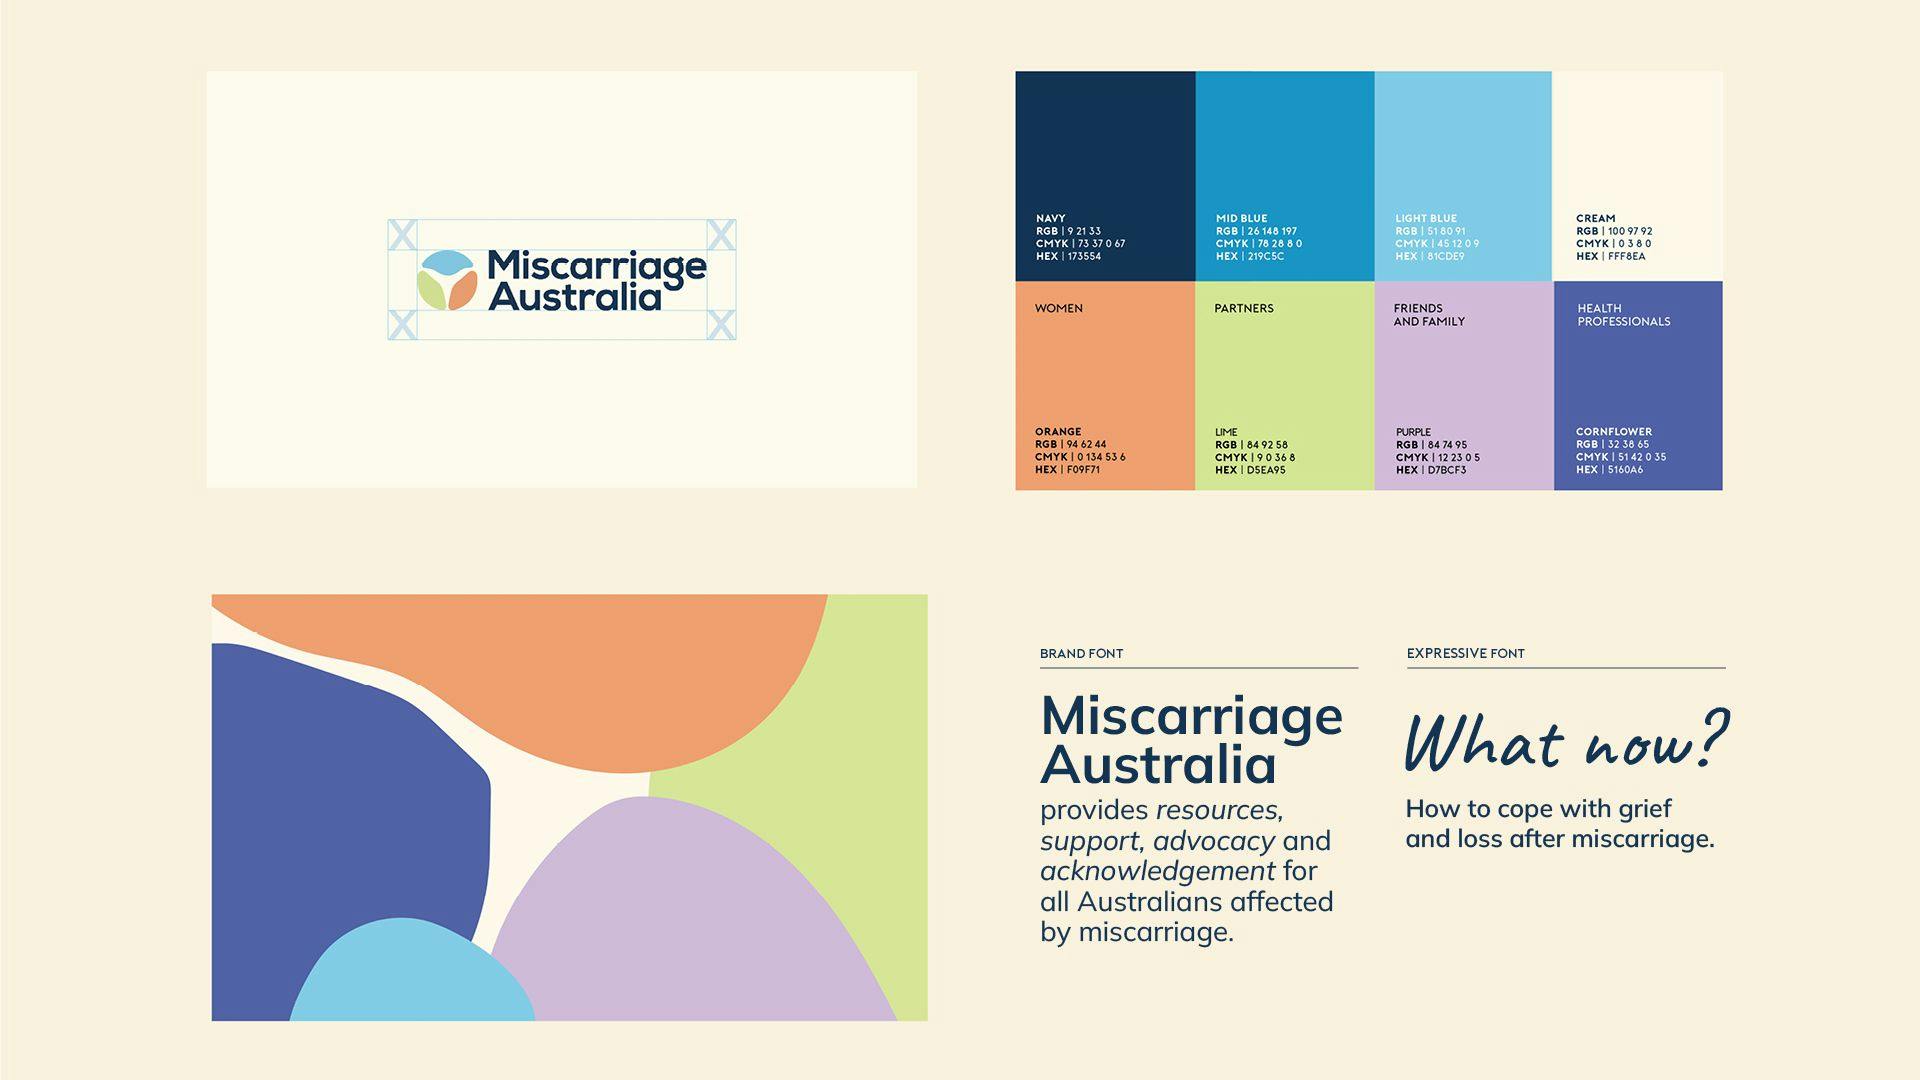 Showing sections of the Miscarriage Australia brand style guide